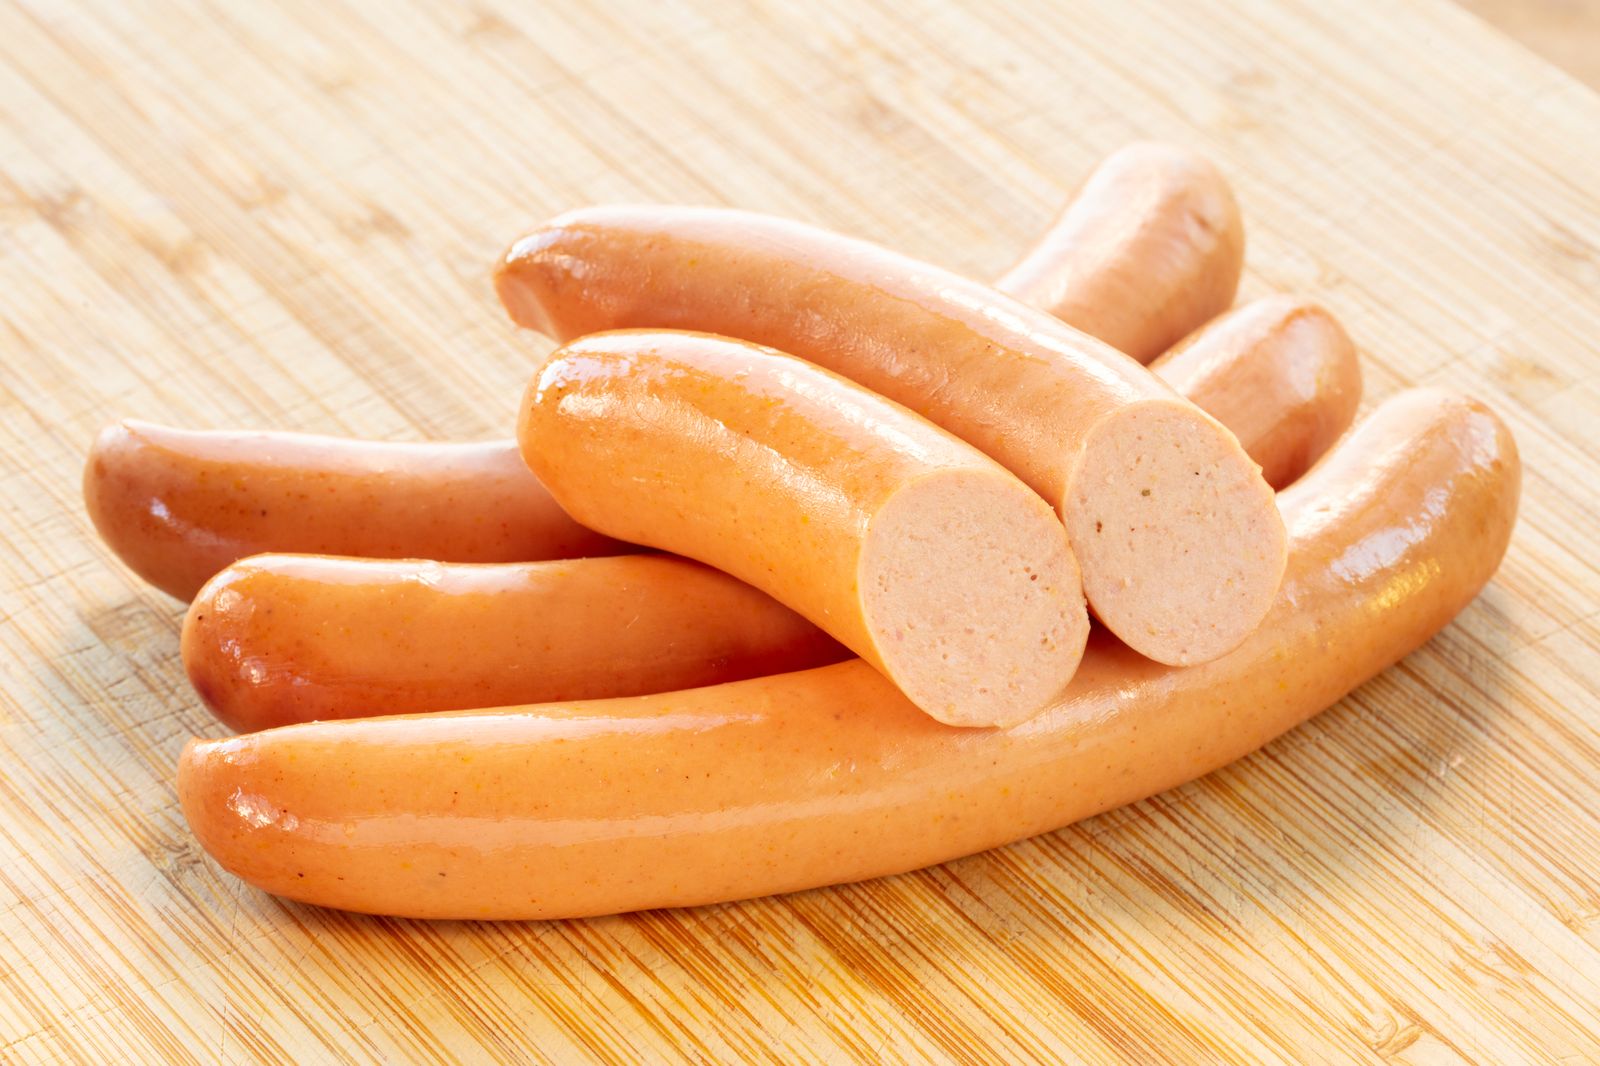 DIFFERENCE BETWEEN FRANKFURTERS, SAUSAGES & VIENNA HOT DOGS